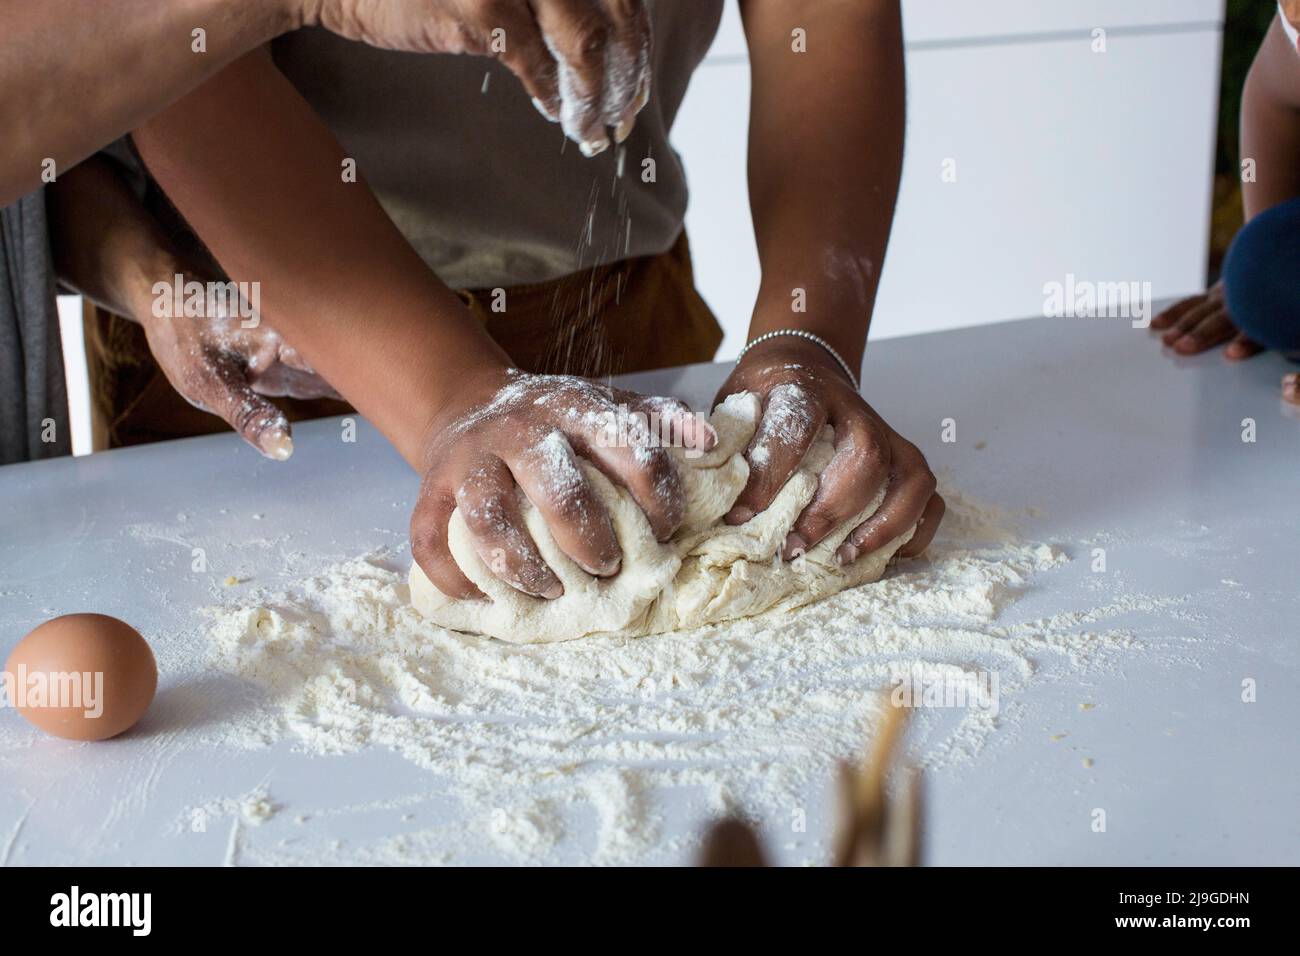 Daughter-in-law kneading dough while mother-in-law sprinkling flour Stock Photo